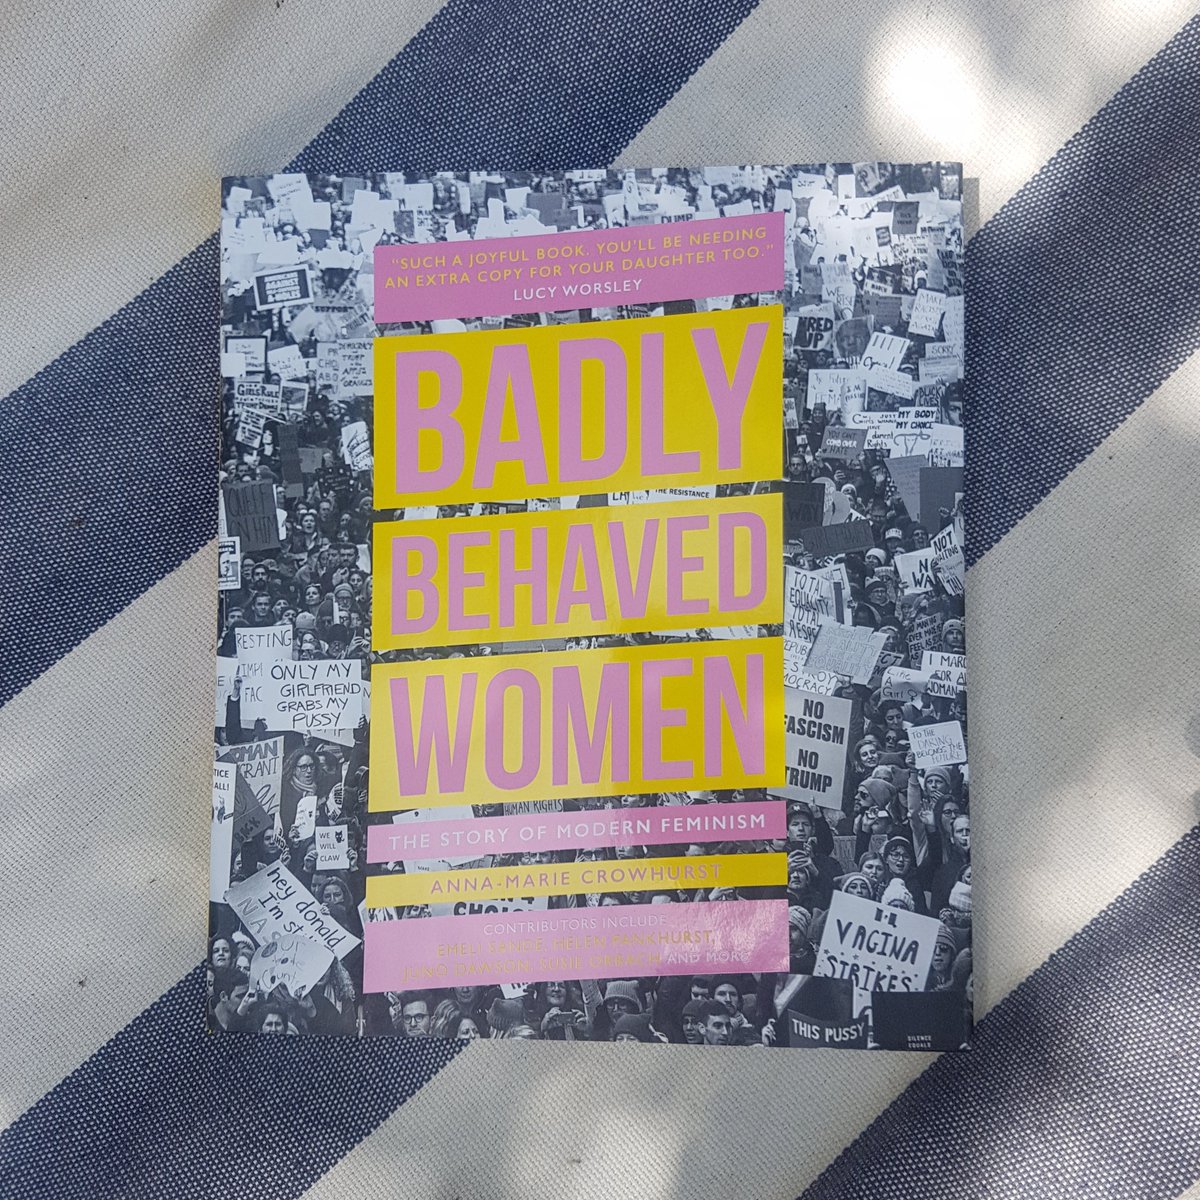 Hail! It's just a week til  #BadlyBehavedWomen is published! So starting today I'm counting down by tweeting a new amazing, inspiring feminist featured in the book every day, until I run out. (Pictured: the book itself enjoying the weather by reclining on the hammock)